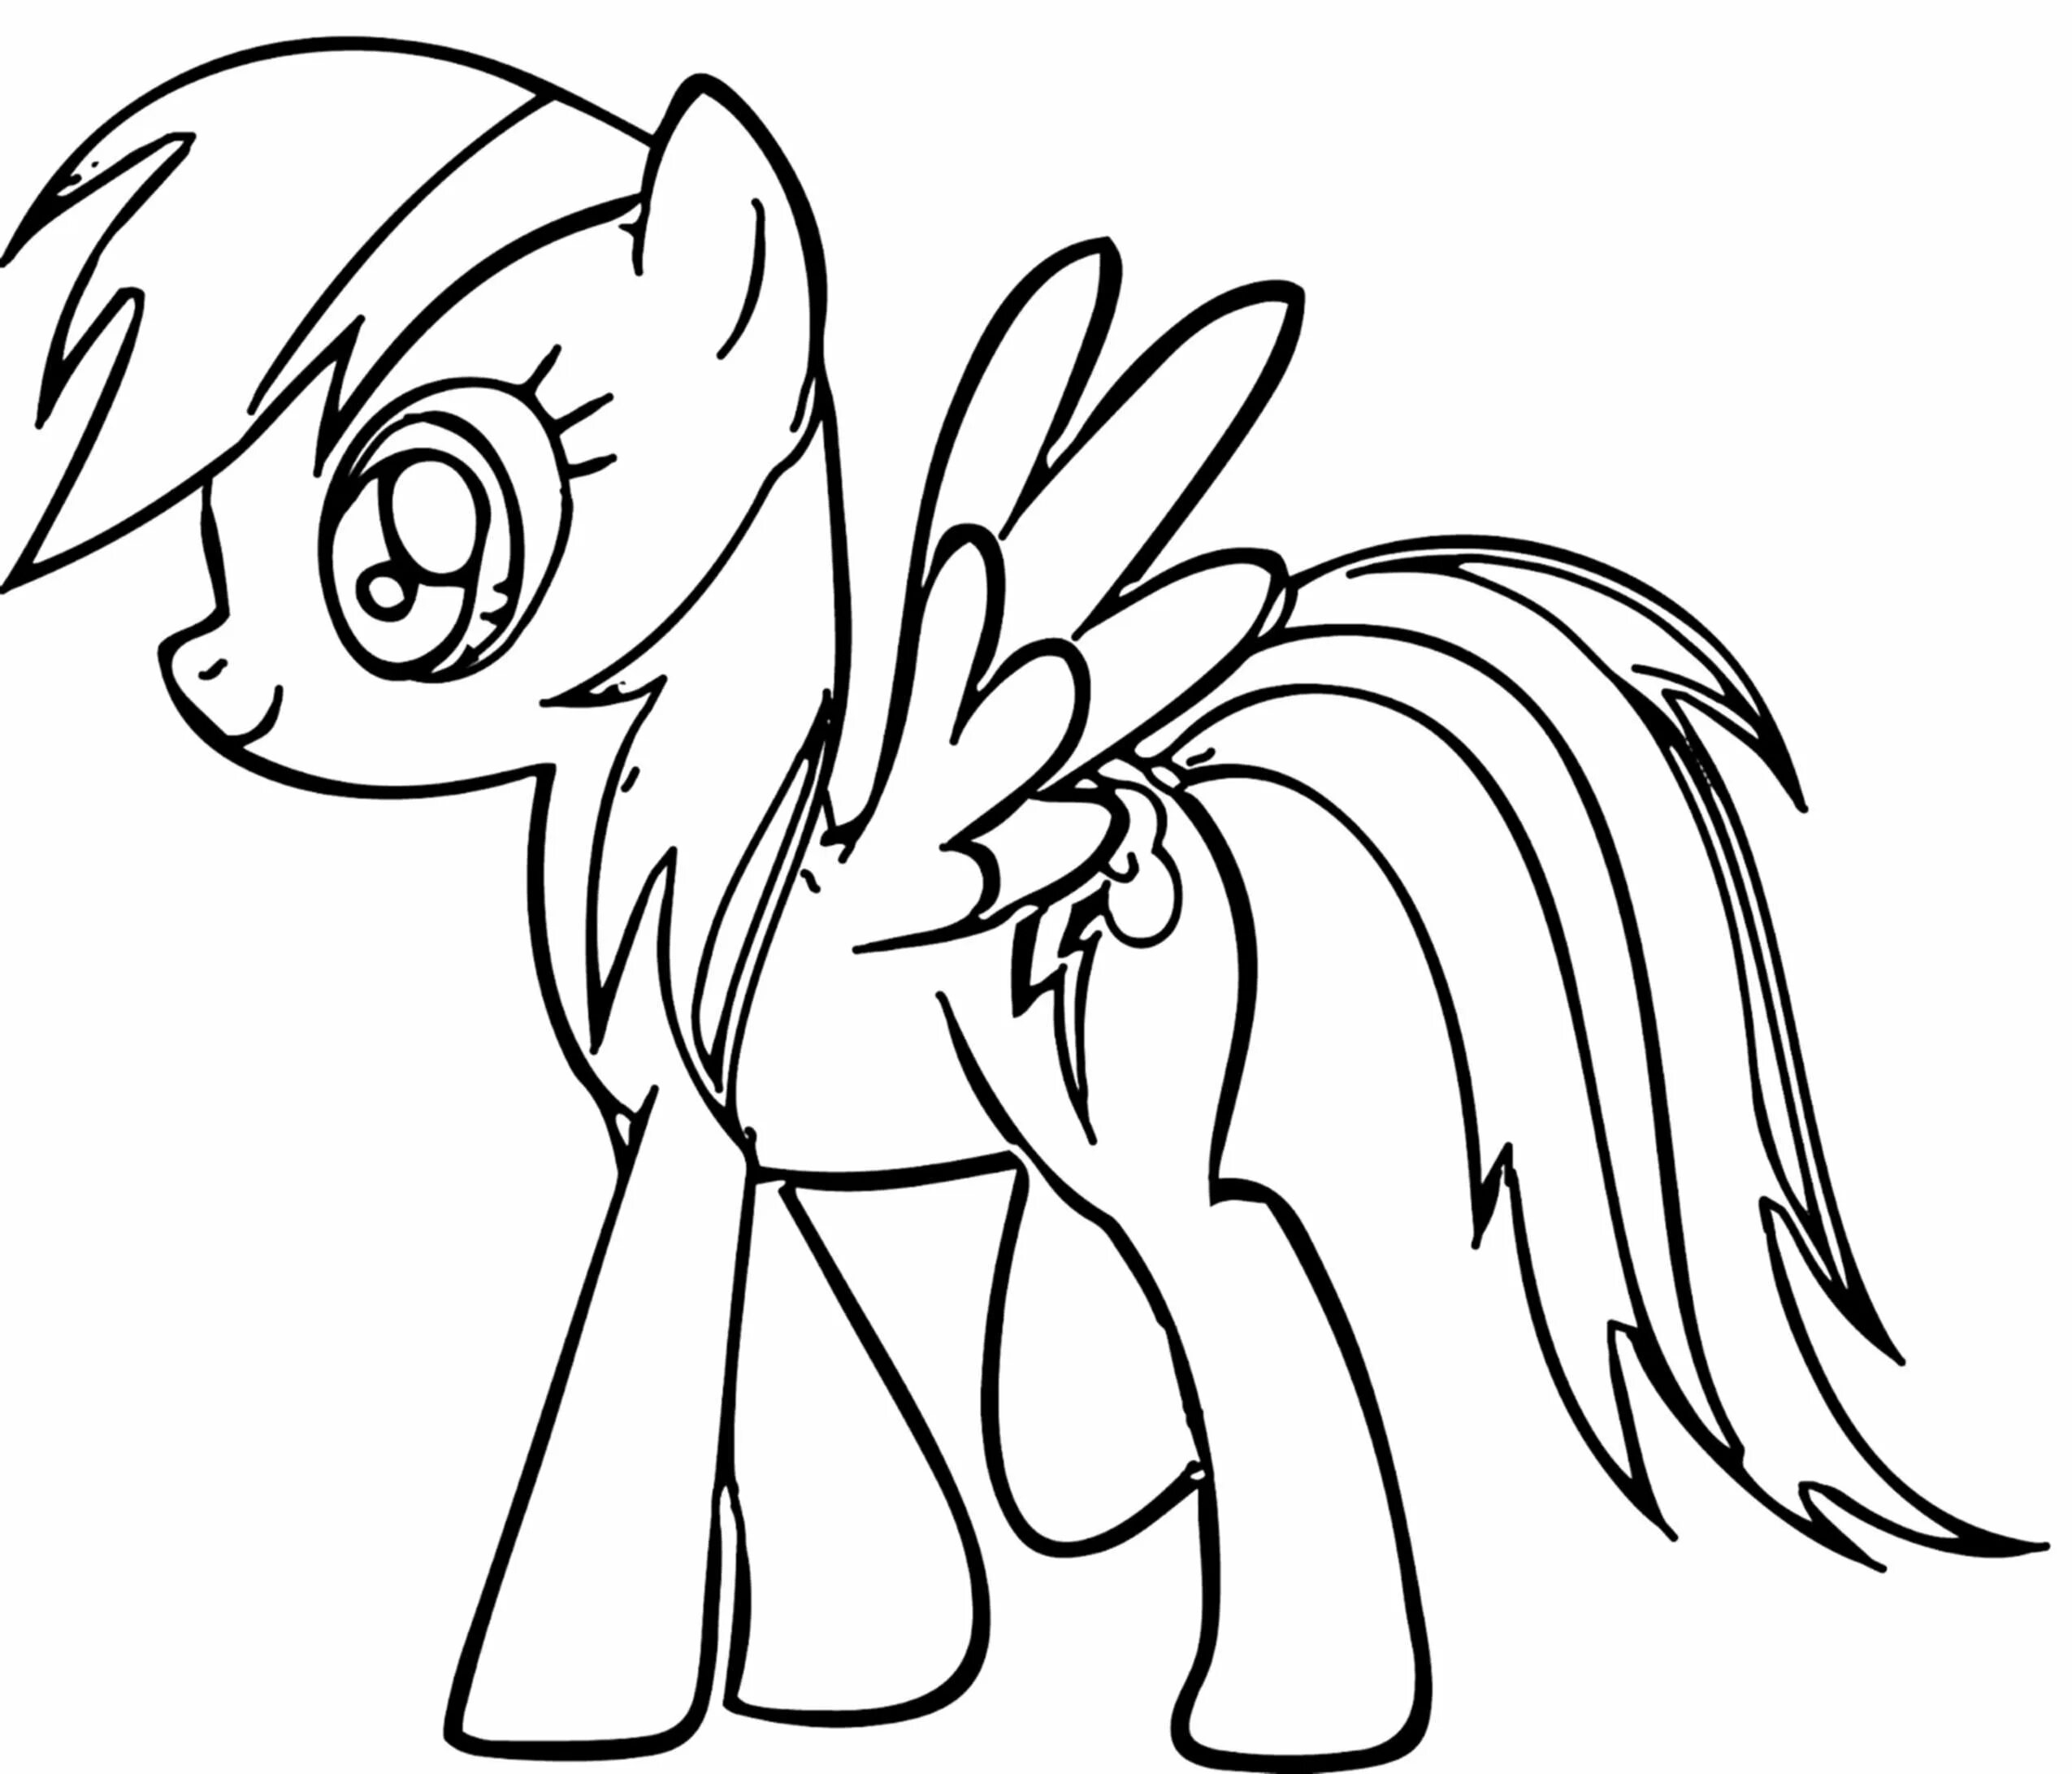 Glitter rainbow dash coloring page